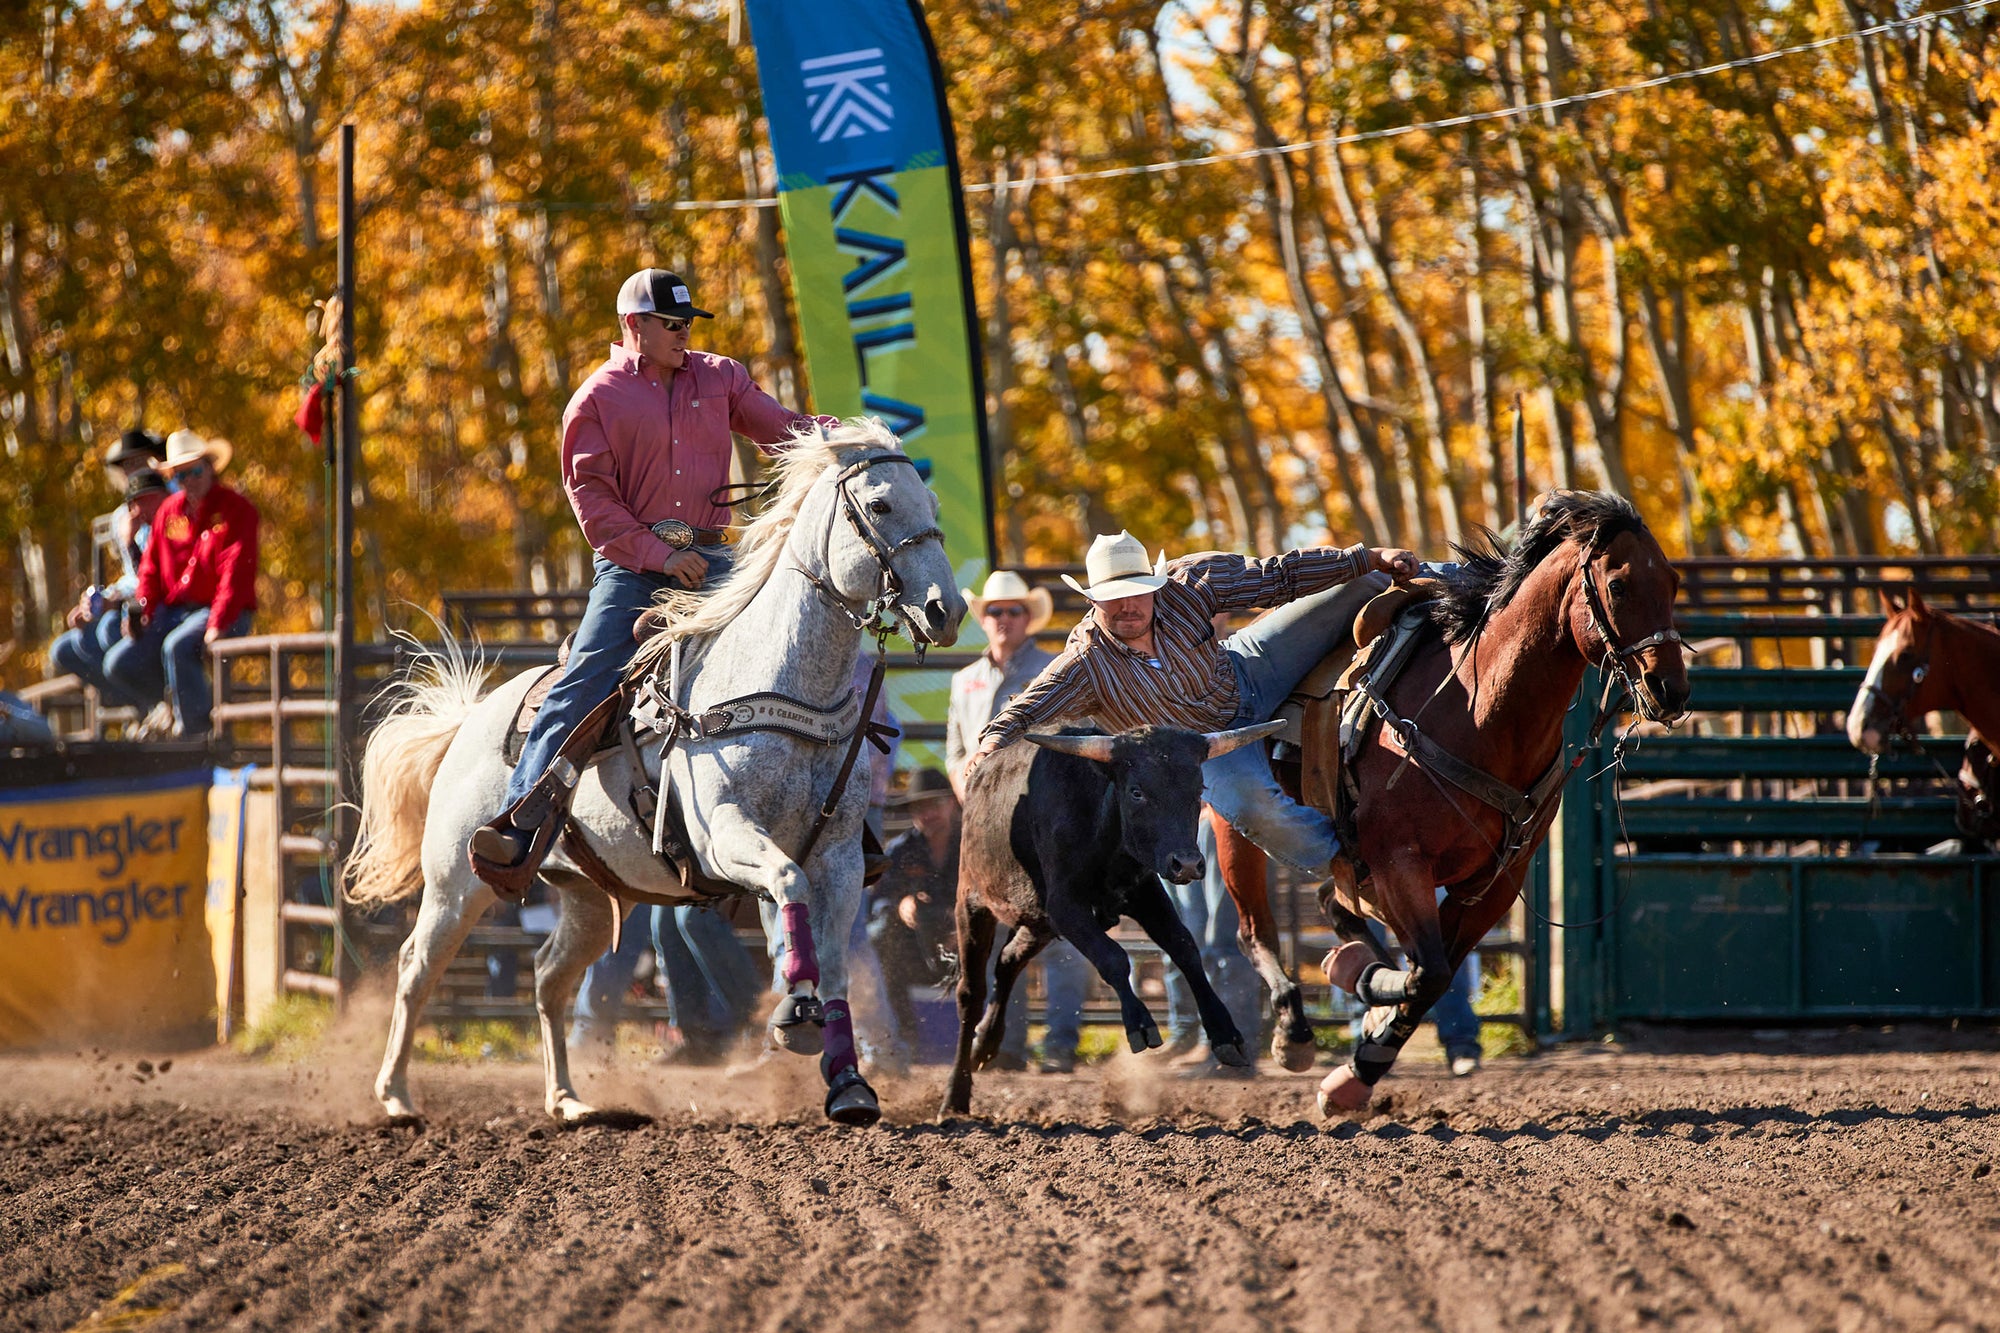 KAILANI Announces National Partnership with The Canadian Professional Rodeo Association “CPRA”